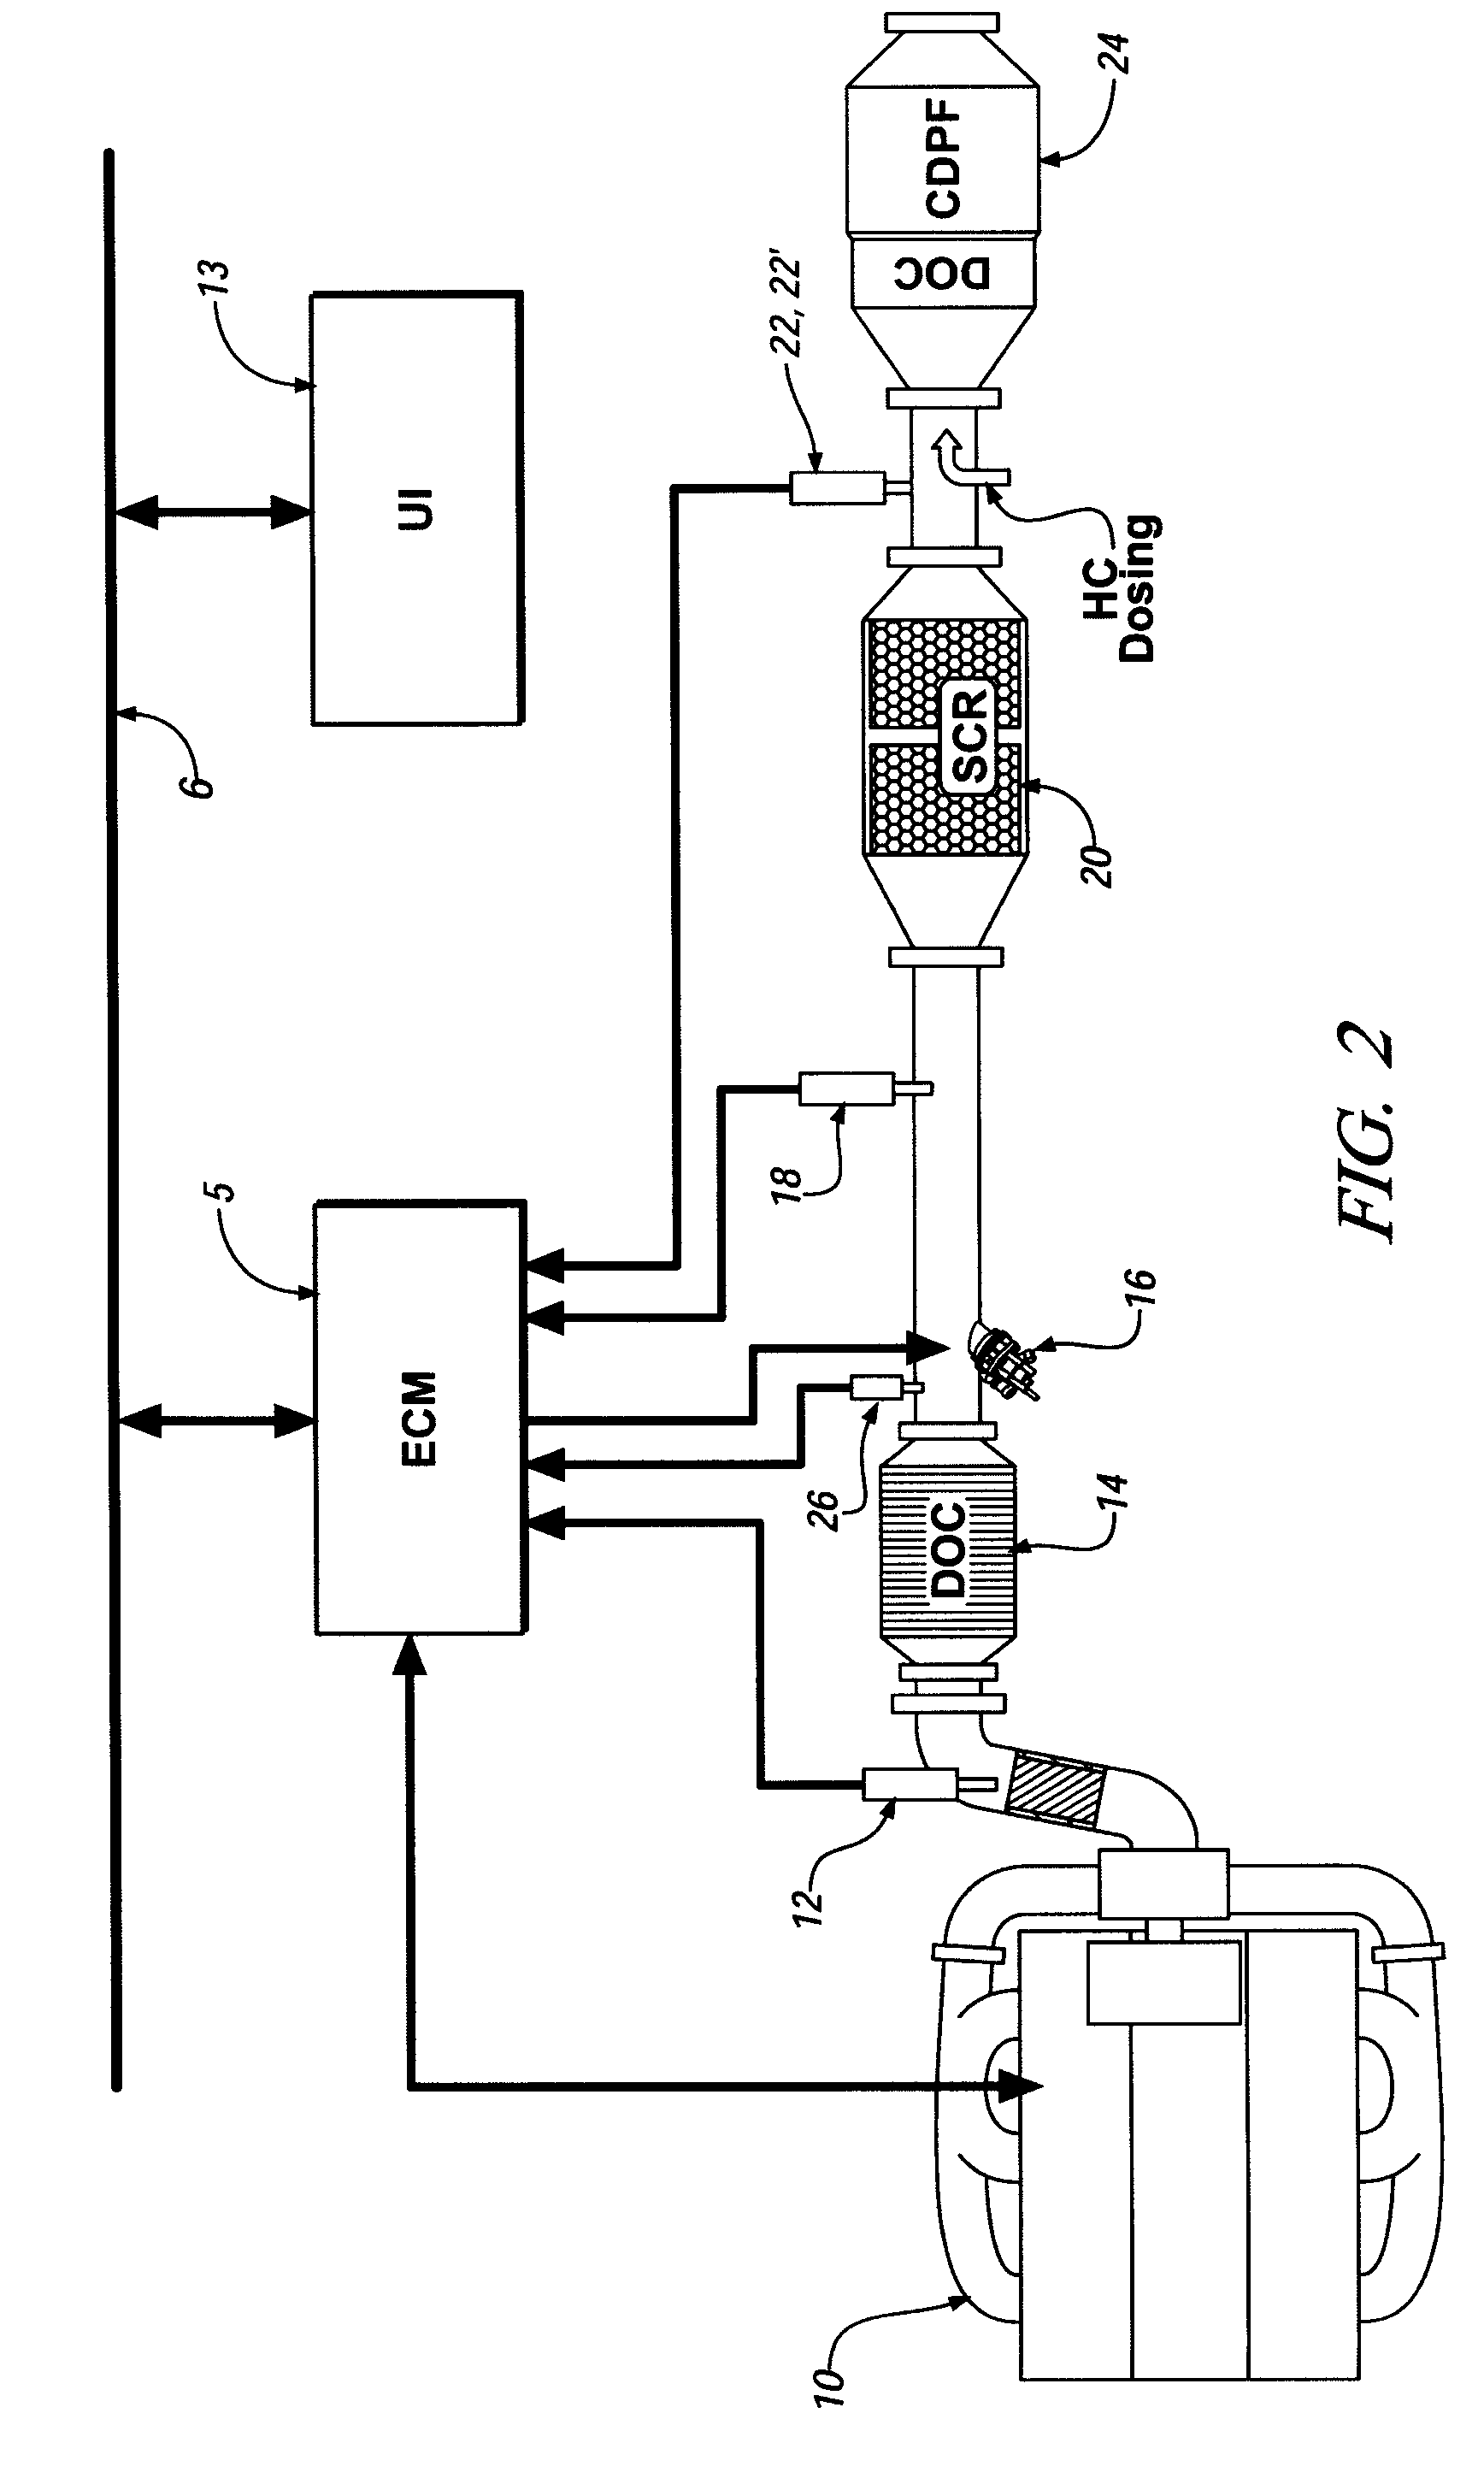 Method and apparatus for monitoring a urea injection system in an exhaust aftertreatment system